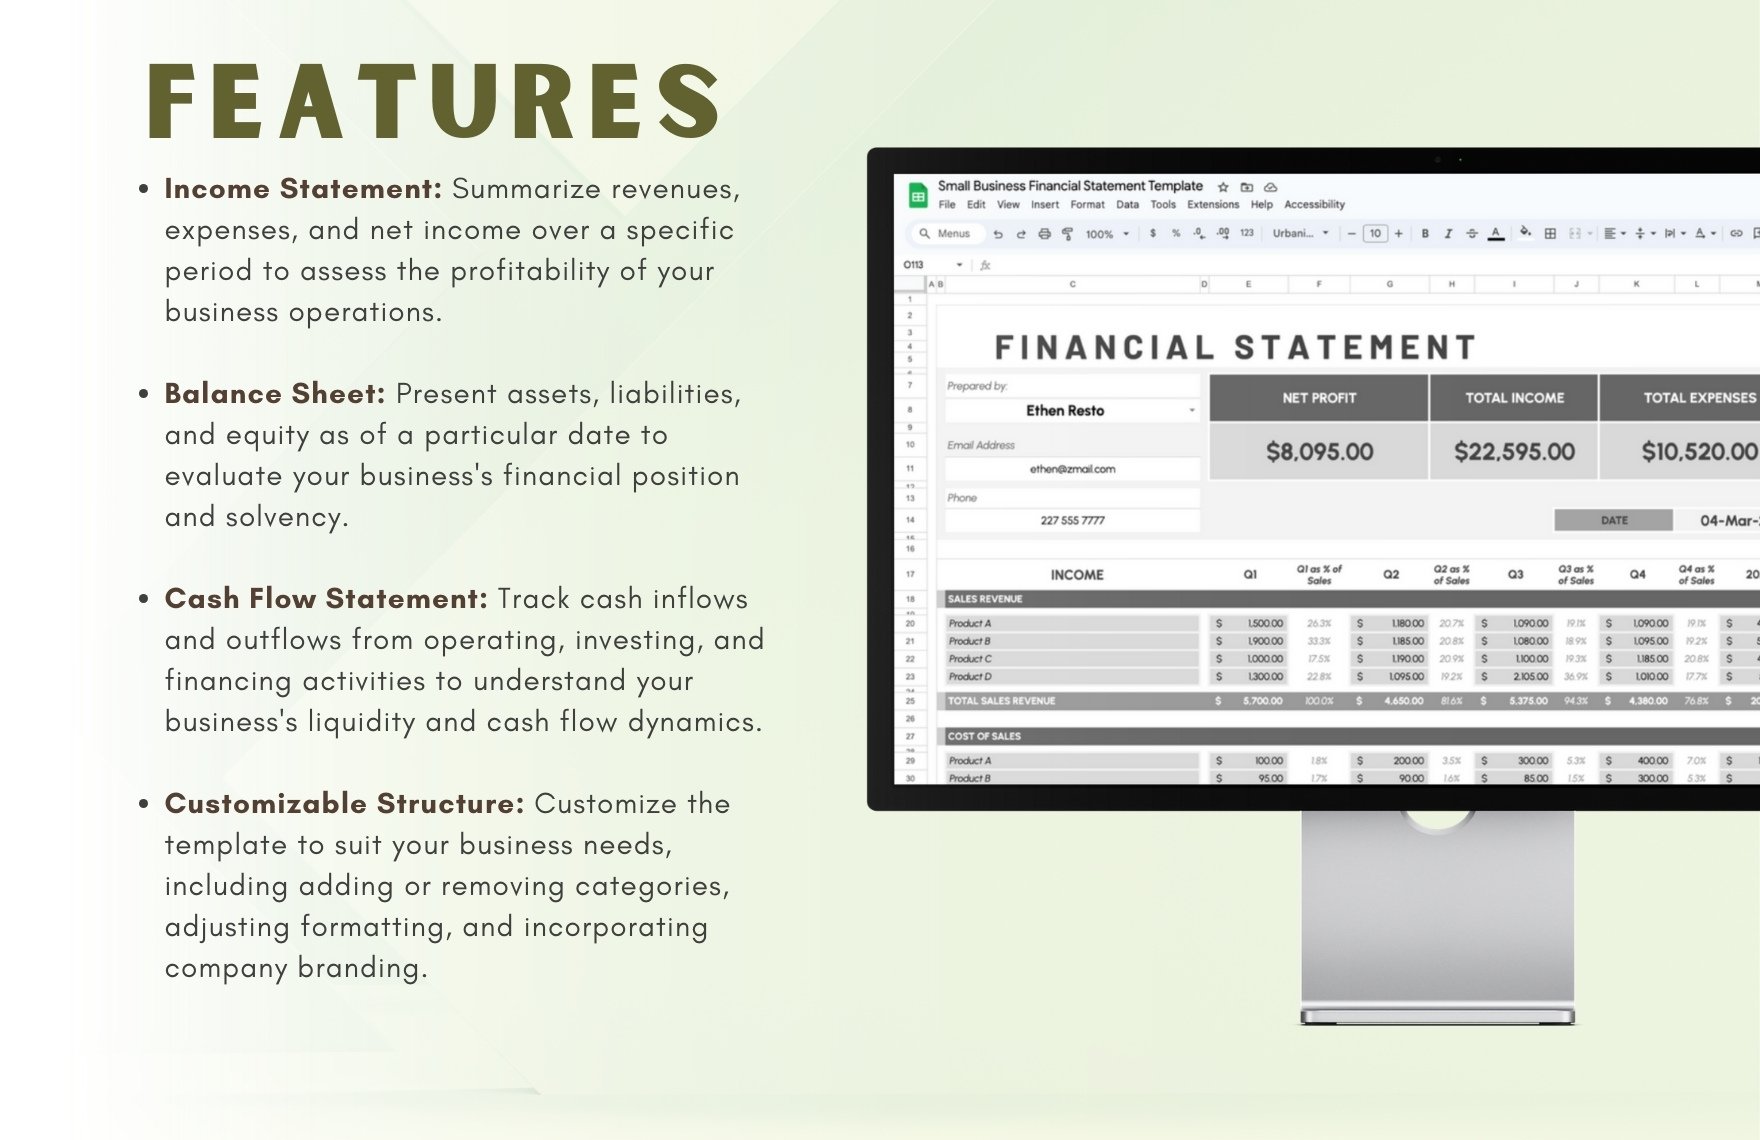 Small Business Financial Statement Template